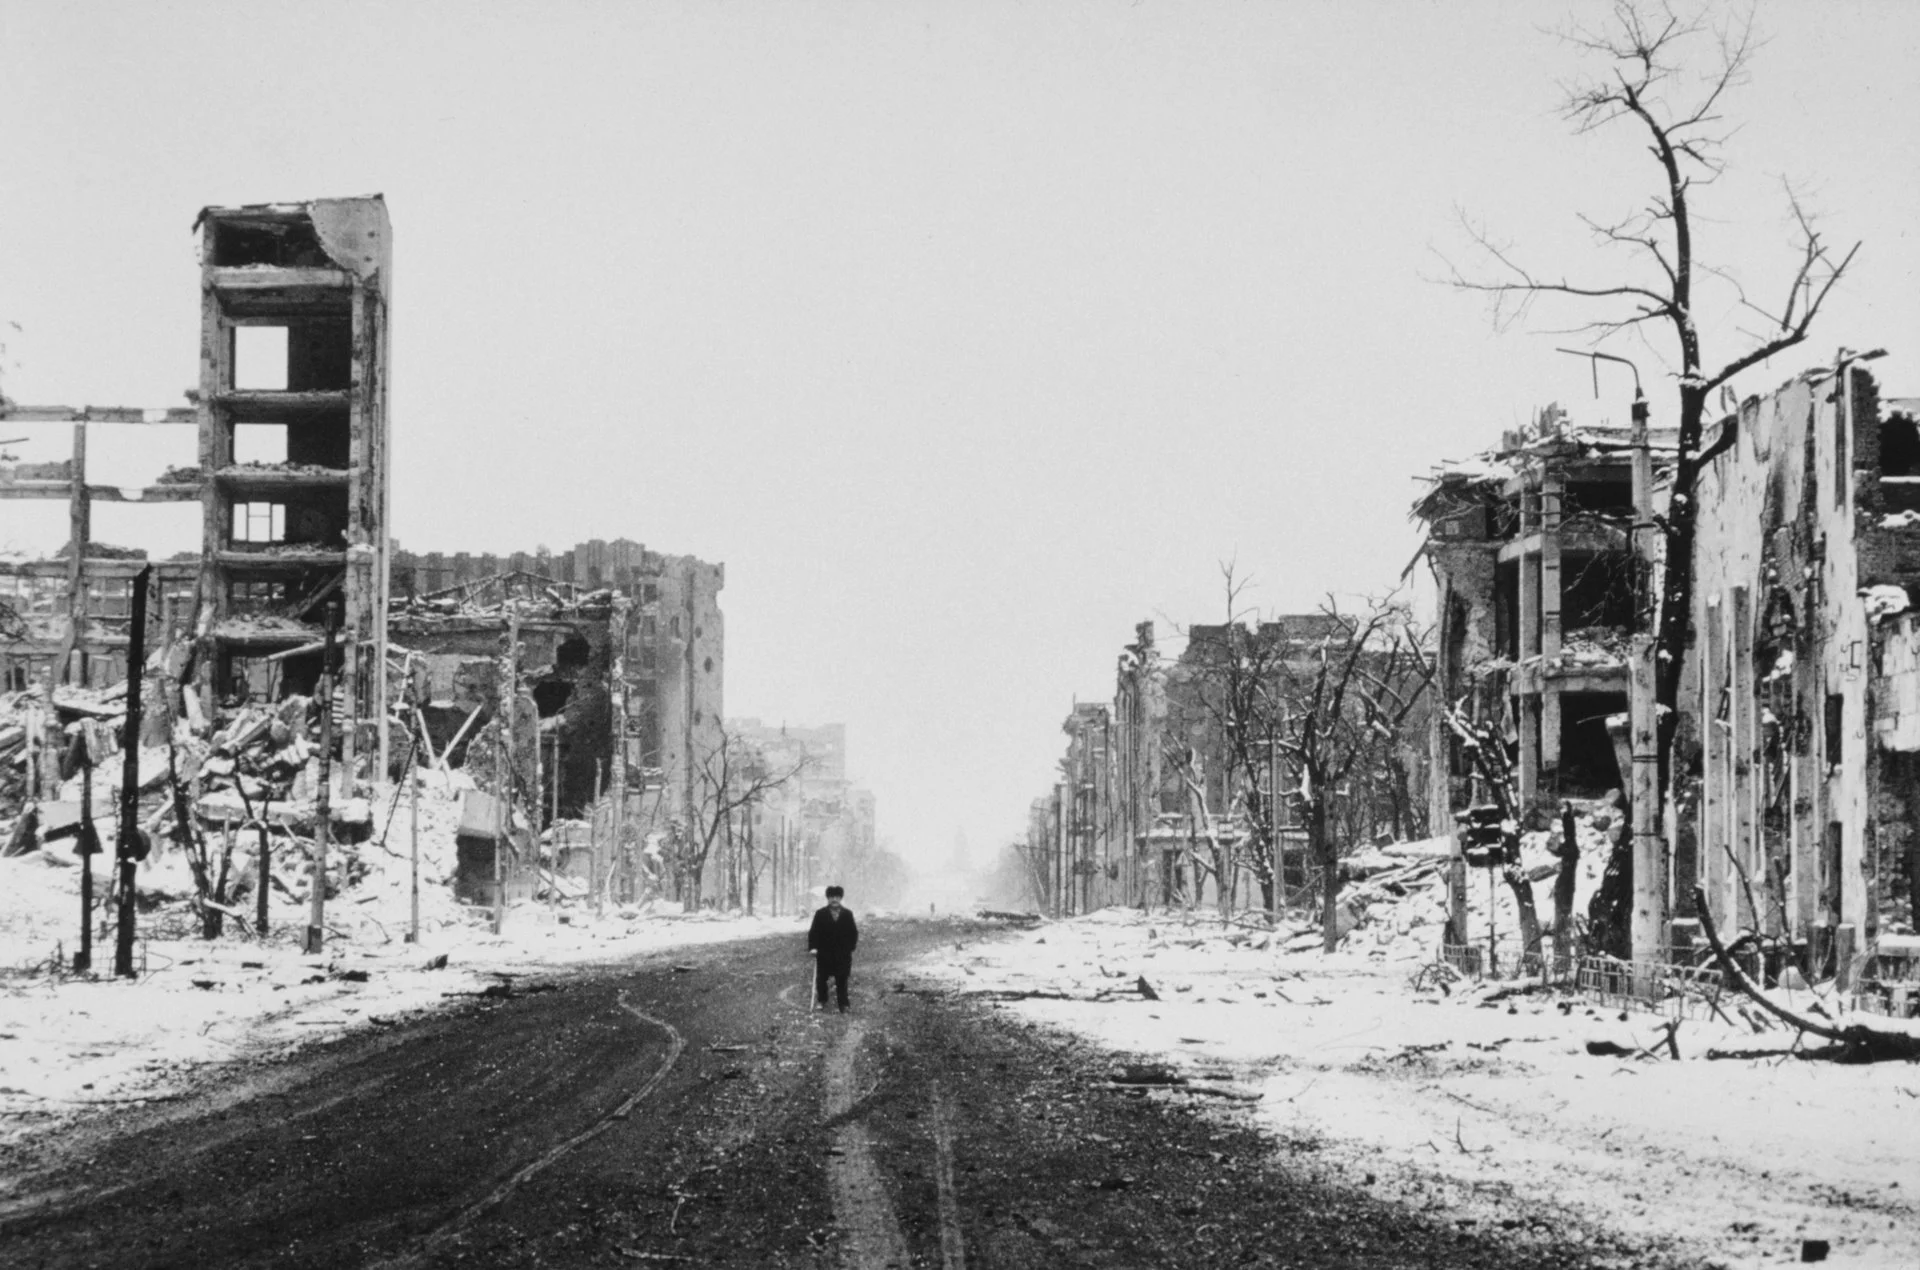 An elderly man walks defiantly down a street in Grozny, risking death from sniper fire, as Russian troops and Chechen separatists continue to fight for the city.